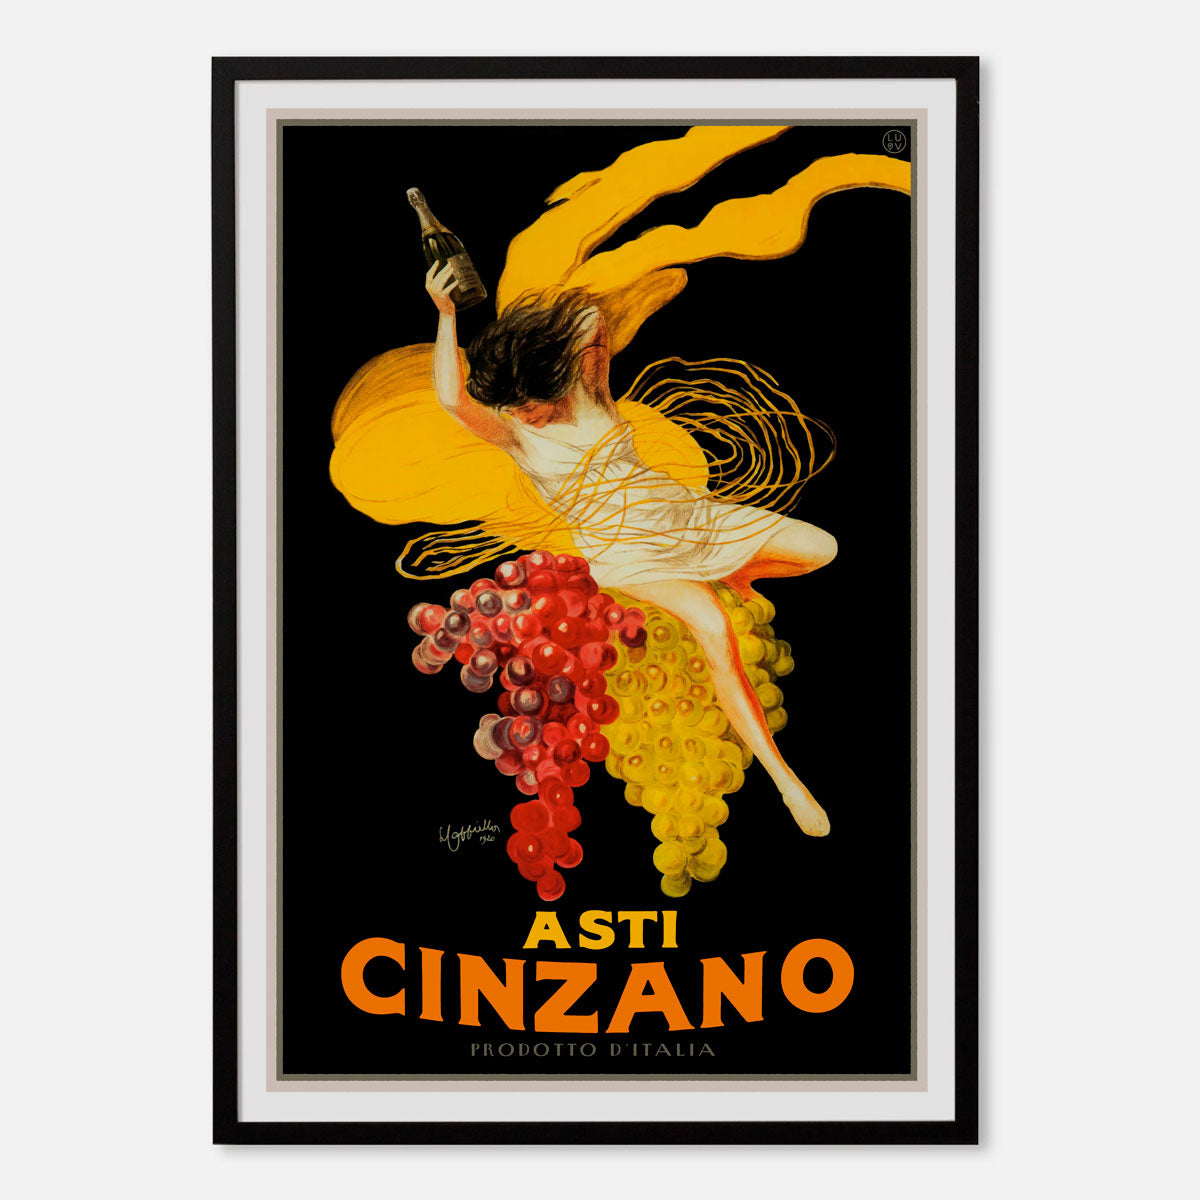 Cinzano retro advertising poster, black frame, Italy Places we Luv